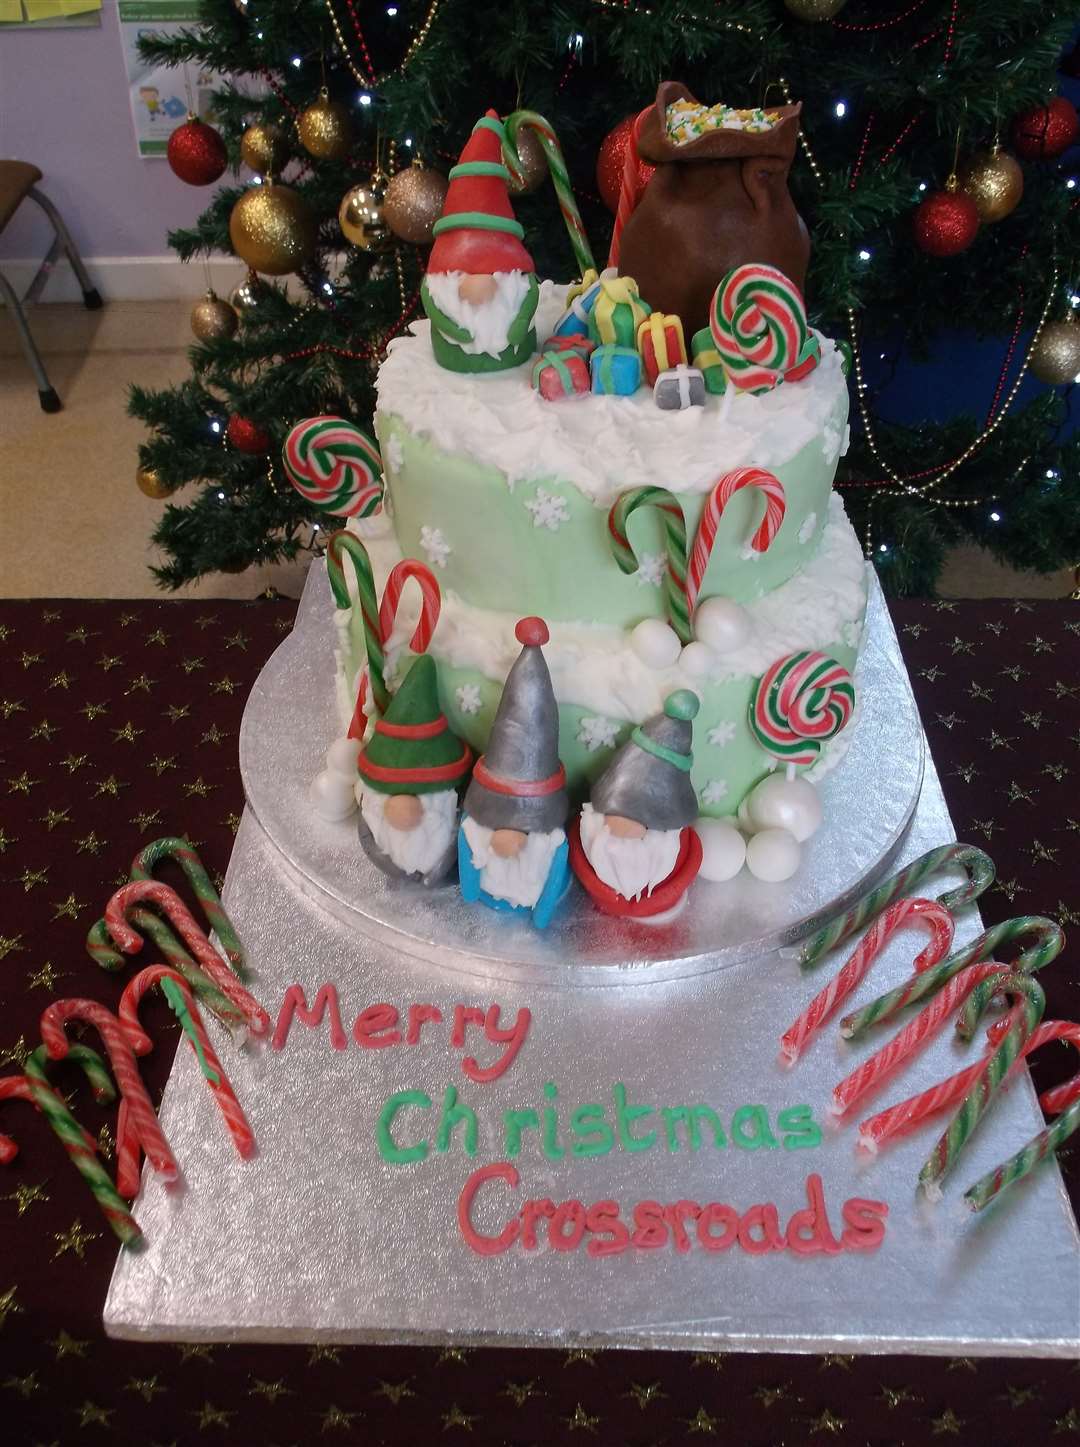 The royal cake that was made especially for Crossroads Primary School.